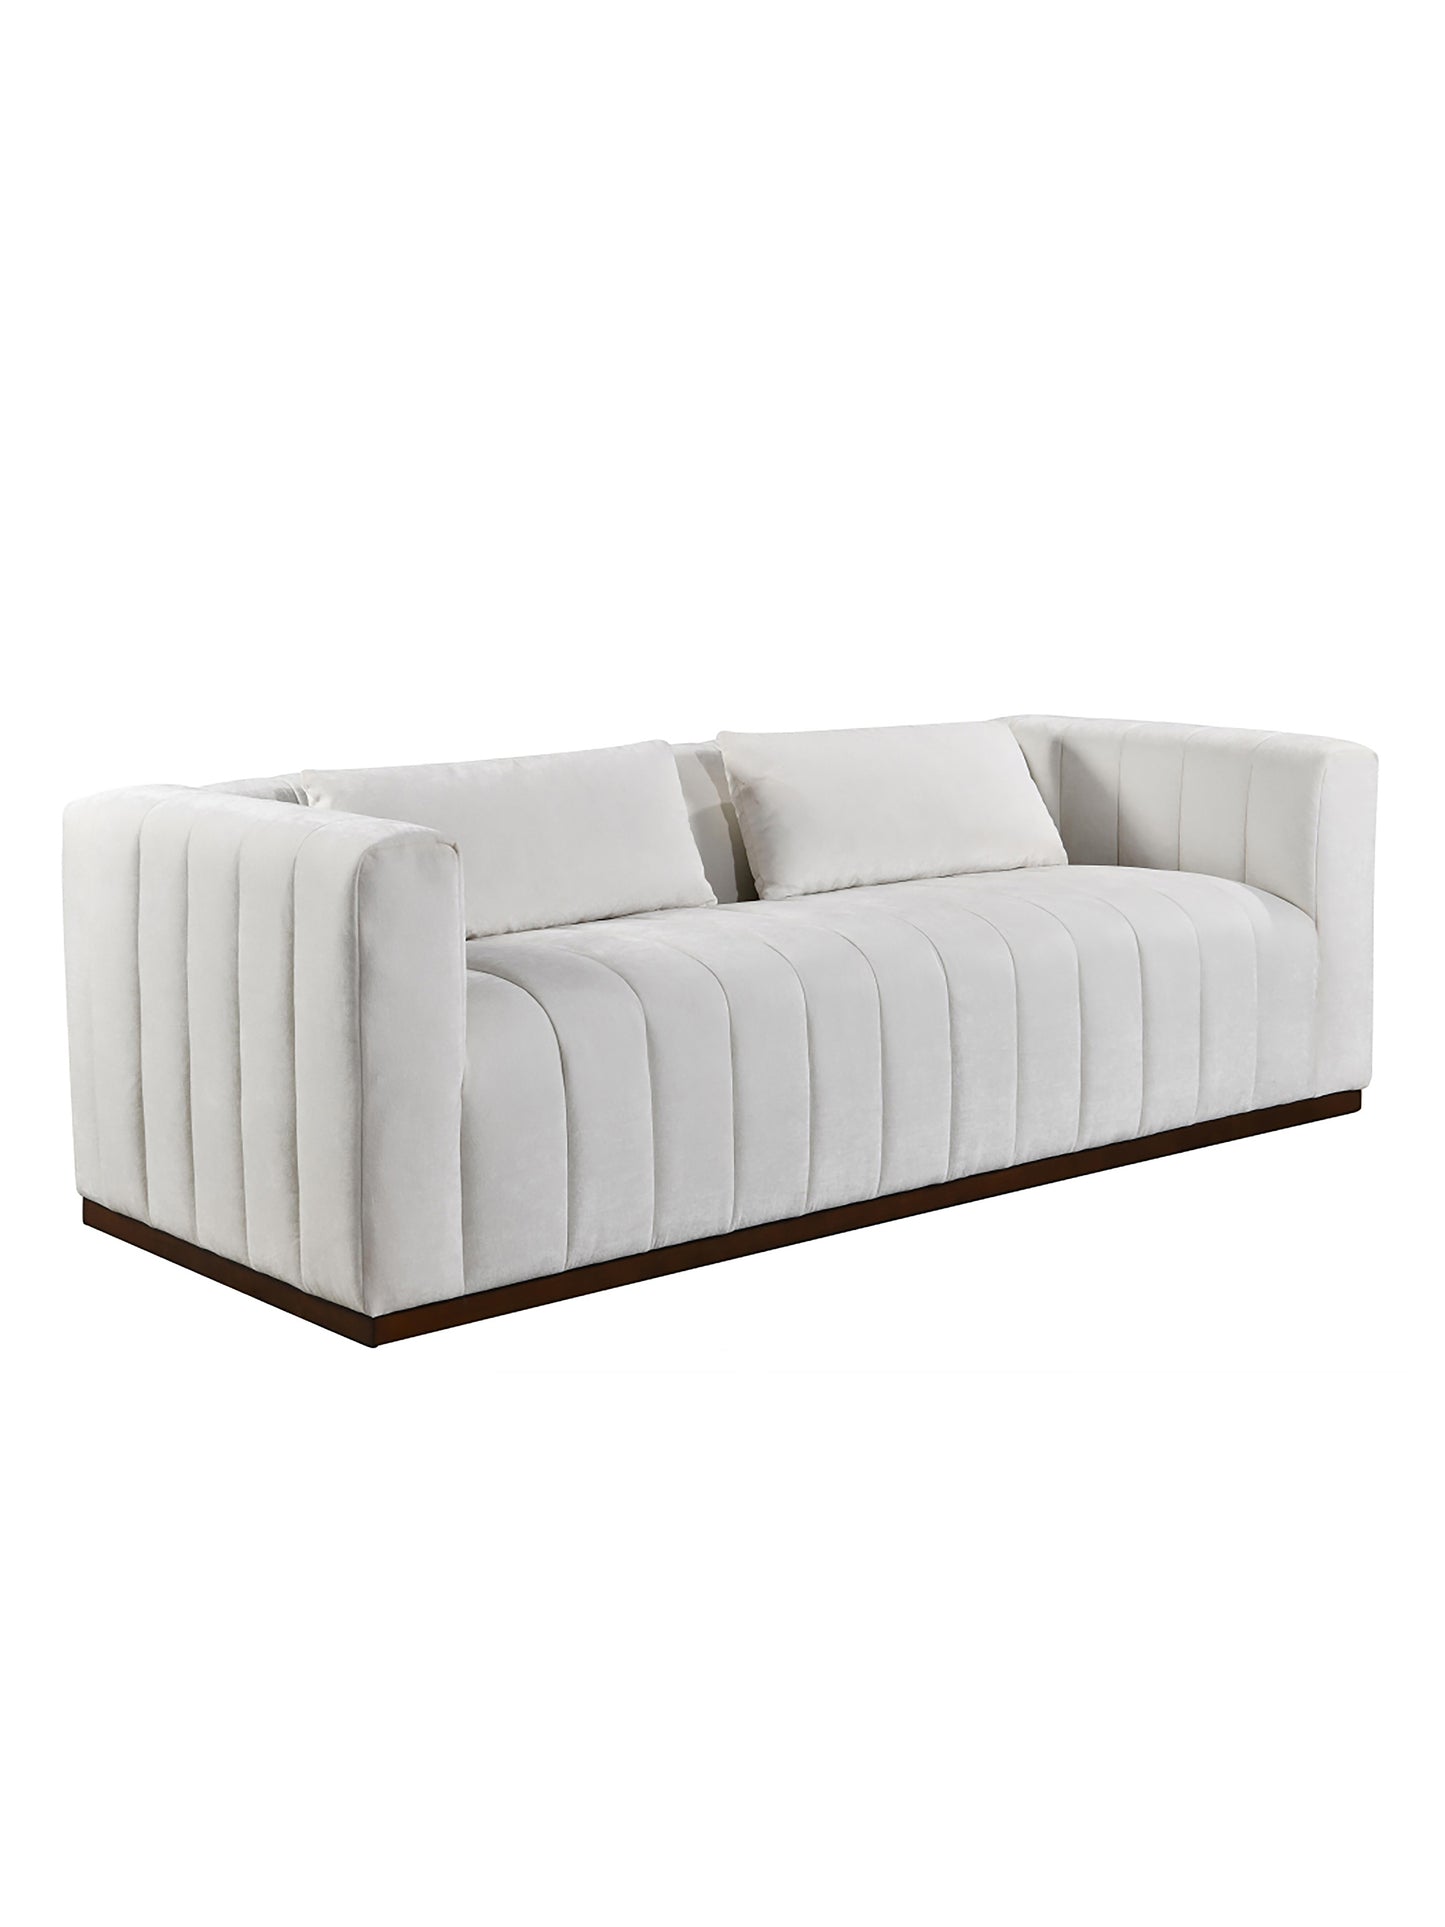 Eclectic Home Sofa Storme Ivory